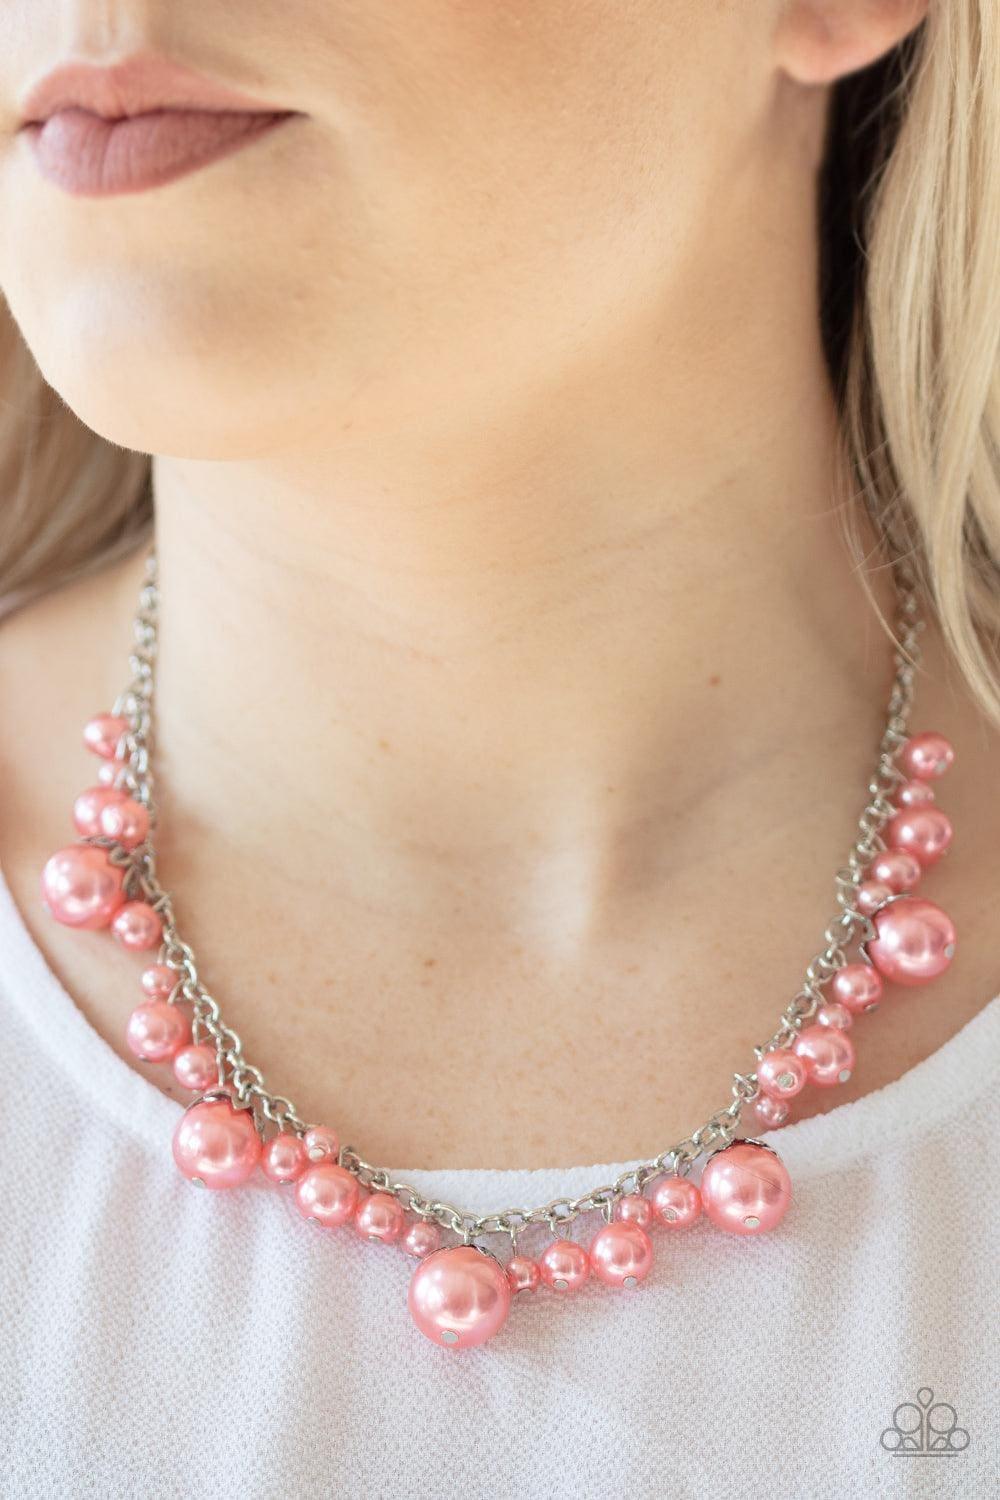 Paparazzi Accessories - Uptown Pearls - Orange Coral Necklace - Bling by JessieK